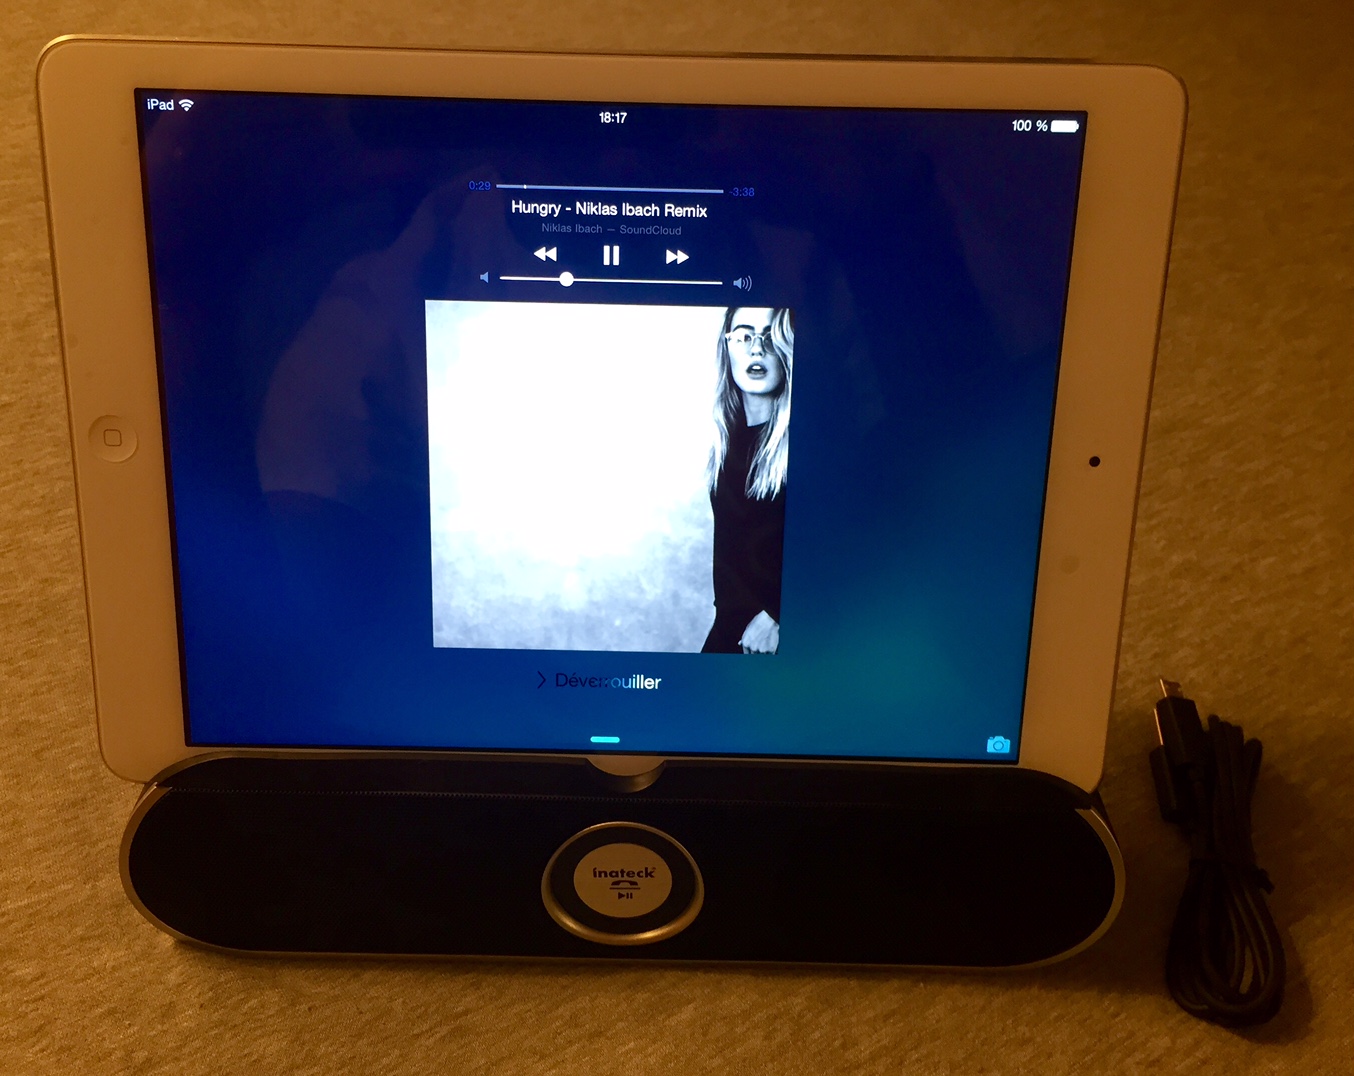 enceinte bluetooth support inateck 1024x813 - Test : support enceinte Bluetooth Inateck pour iPad, iPhone, iPod Touch